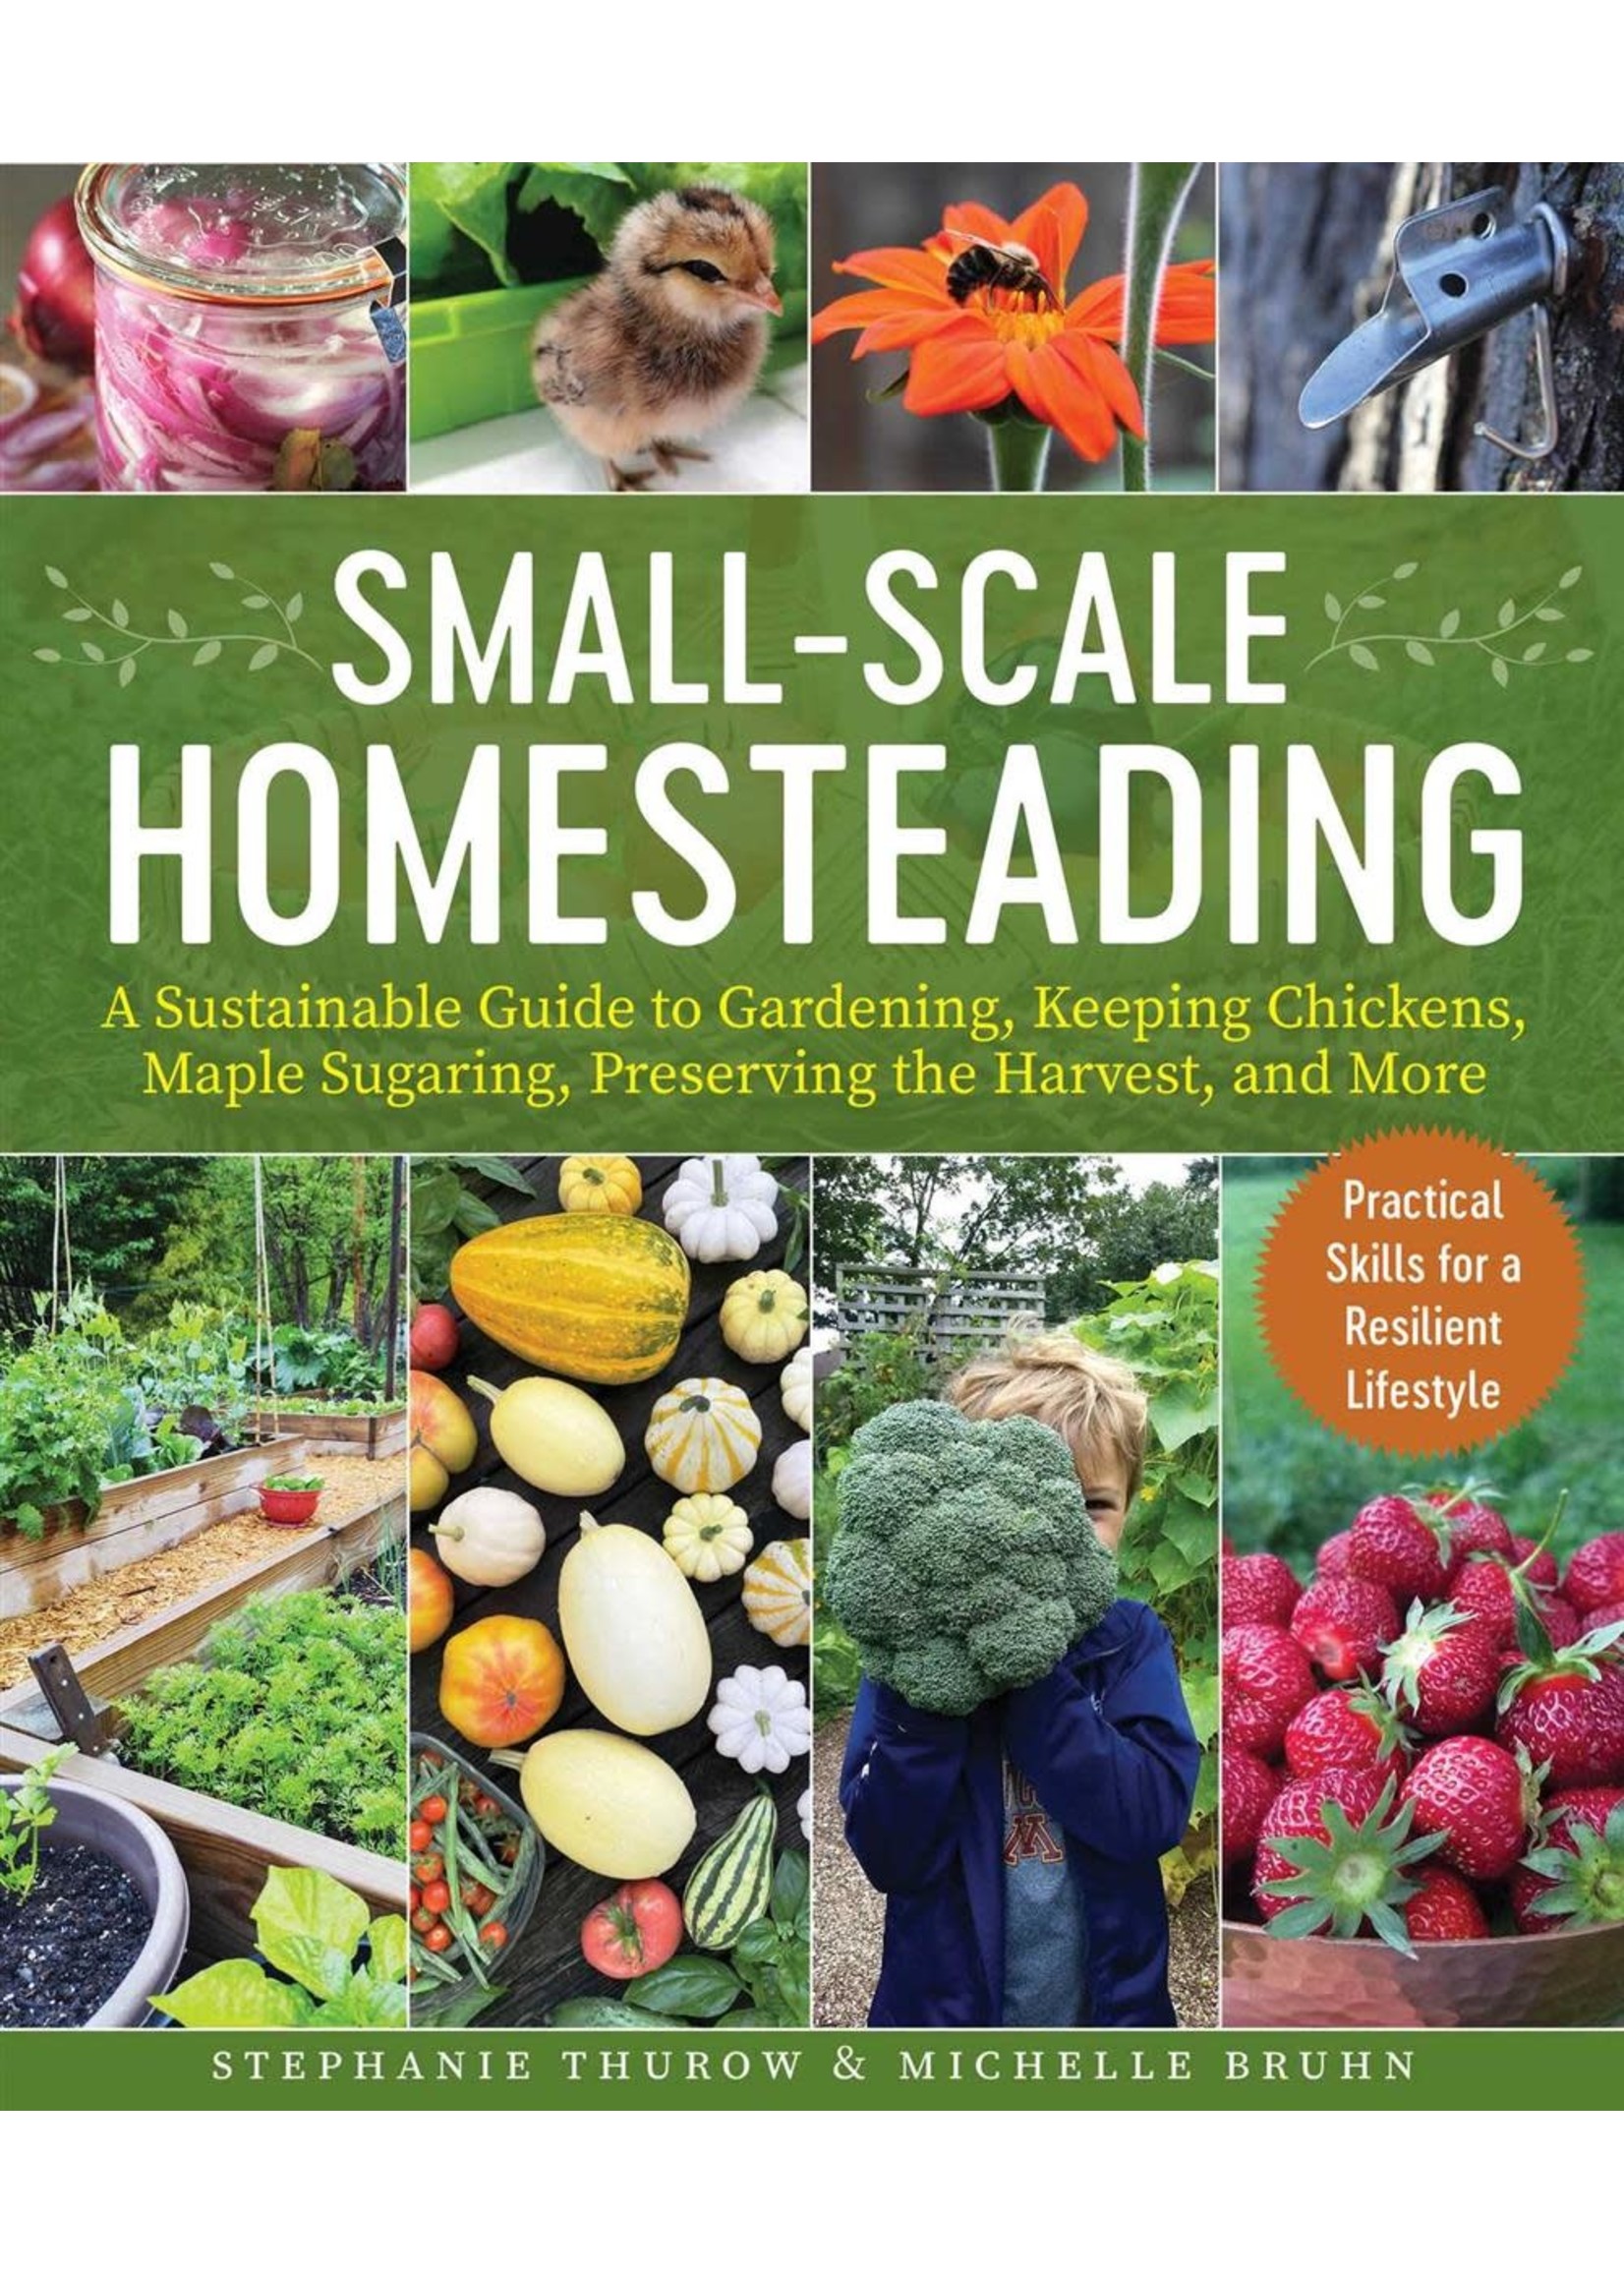 Small-Scale Homesteading: A Sustainable Guide to Gardening, Keeping Chickens, Maple Sugaring, Preserving the Harvest, and More by Stephanie Thurow, Michelle Bruhn